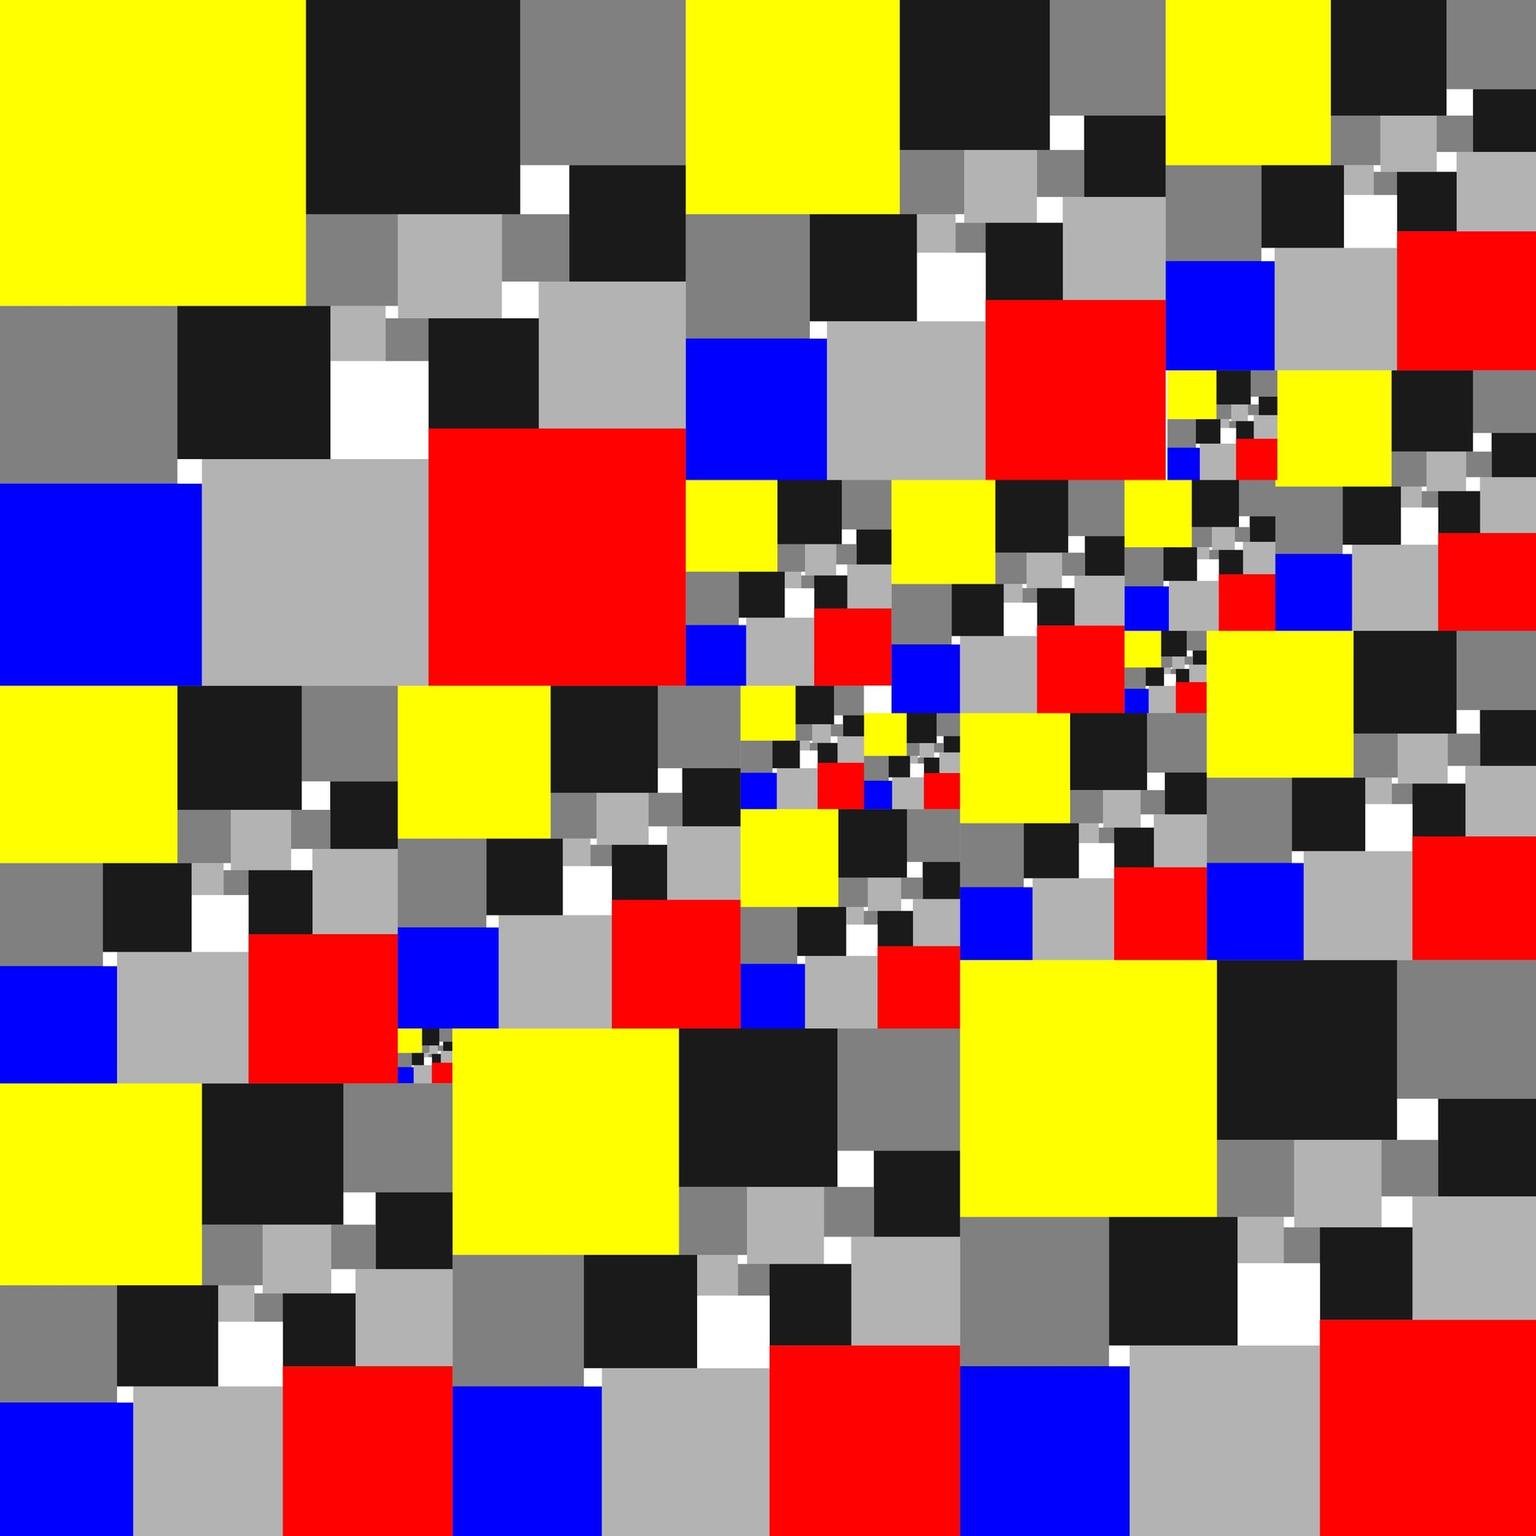 Image for entry 'Recursive SPSS order 21 - Yellow-Red-Blue Mondrian Style'